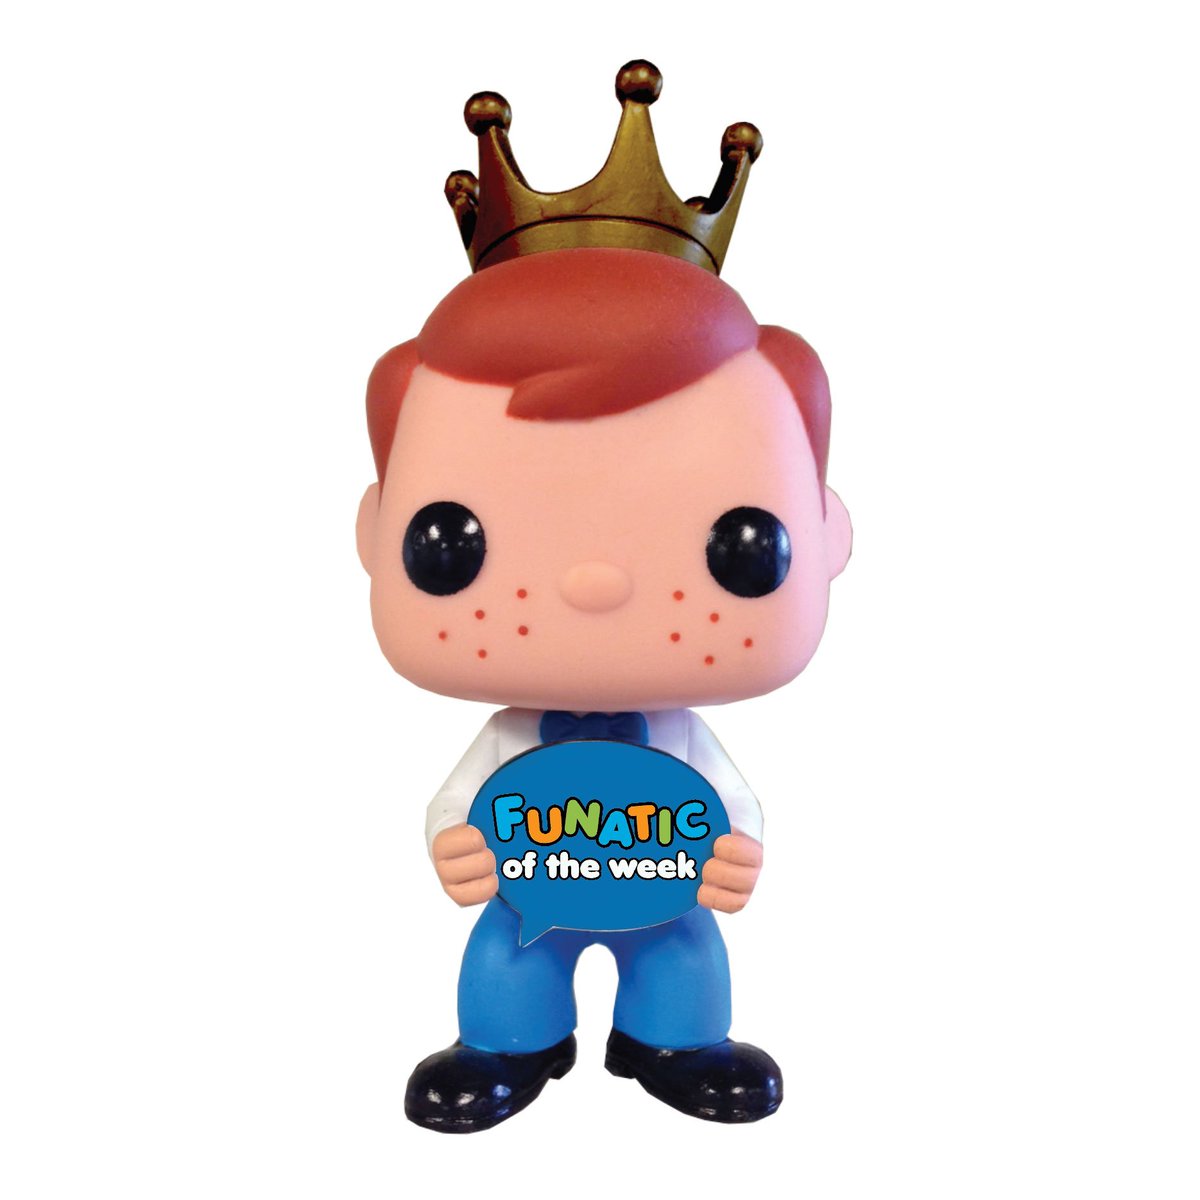 Funko on "Want to be our next Funatic the Week? Apply here: https://t.co/DTVZbiKp1U https://t.co/T191ulMU9p" / Twitter